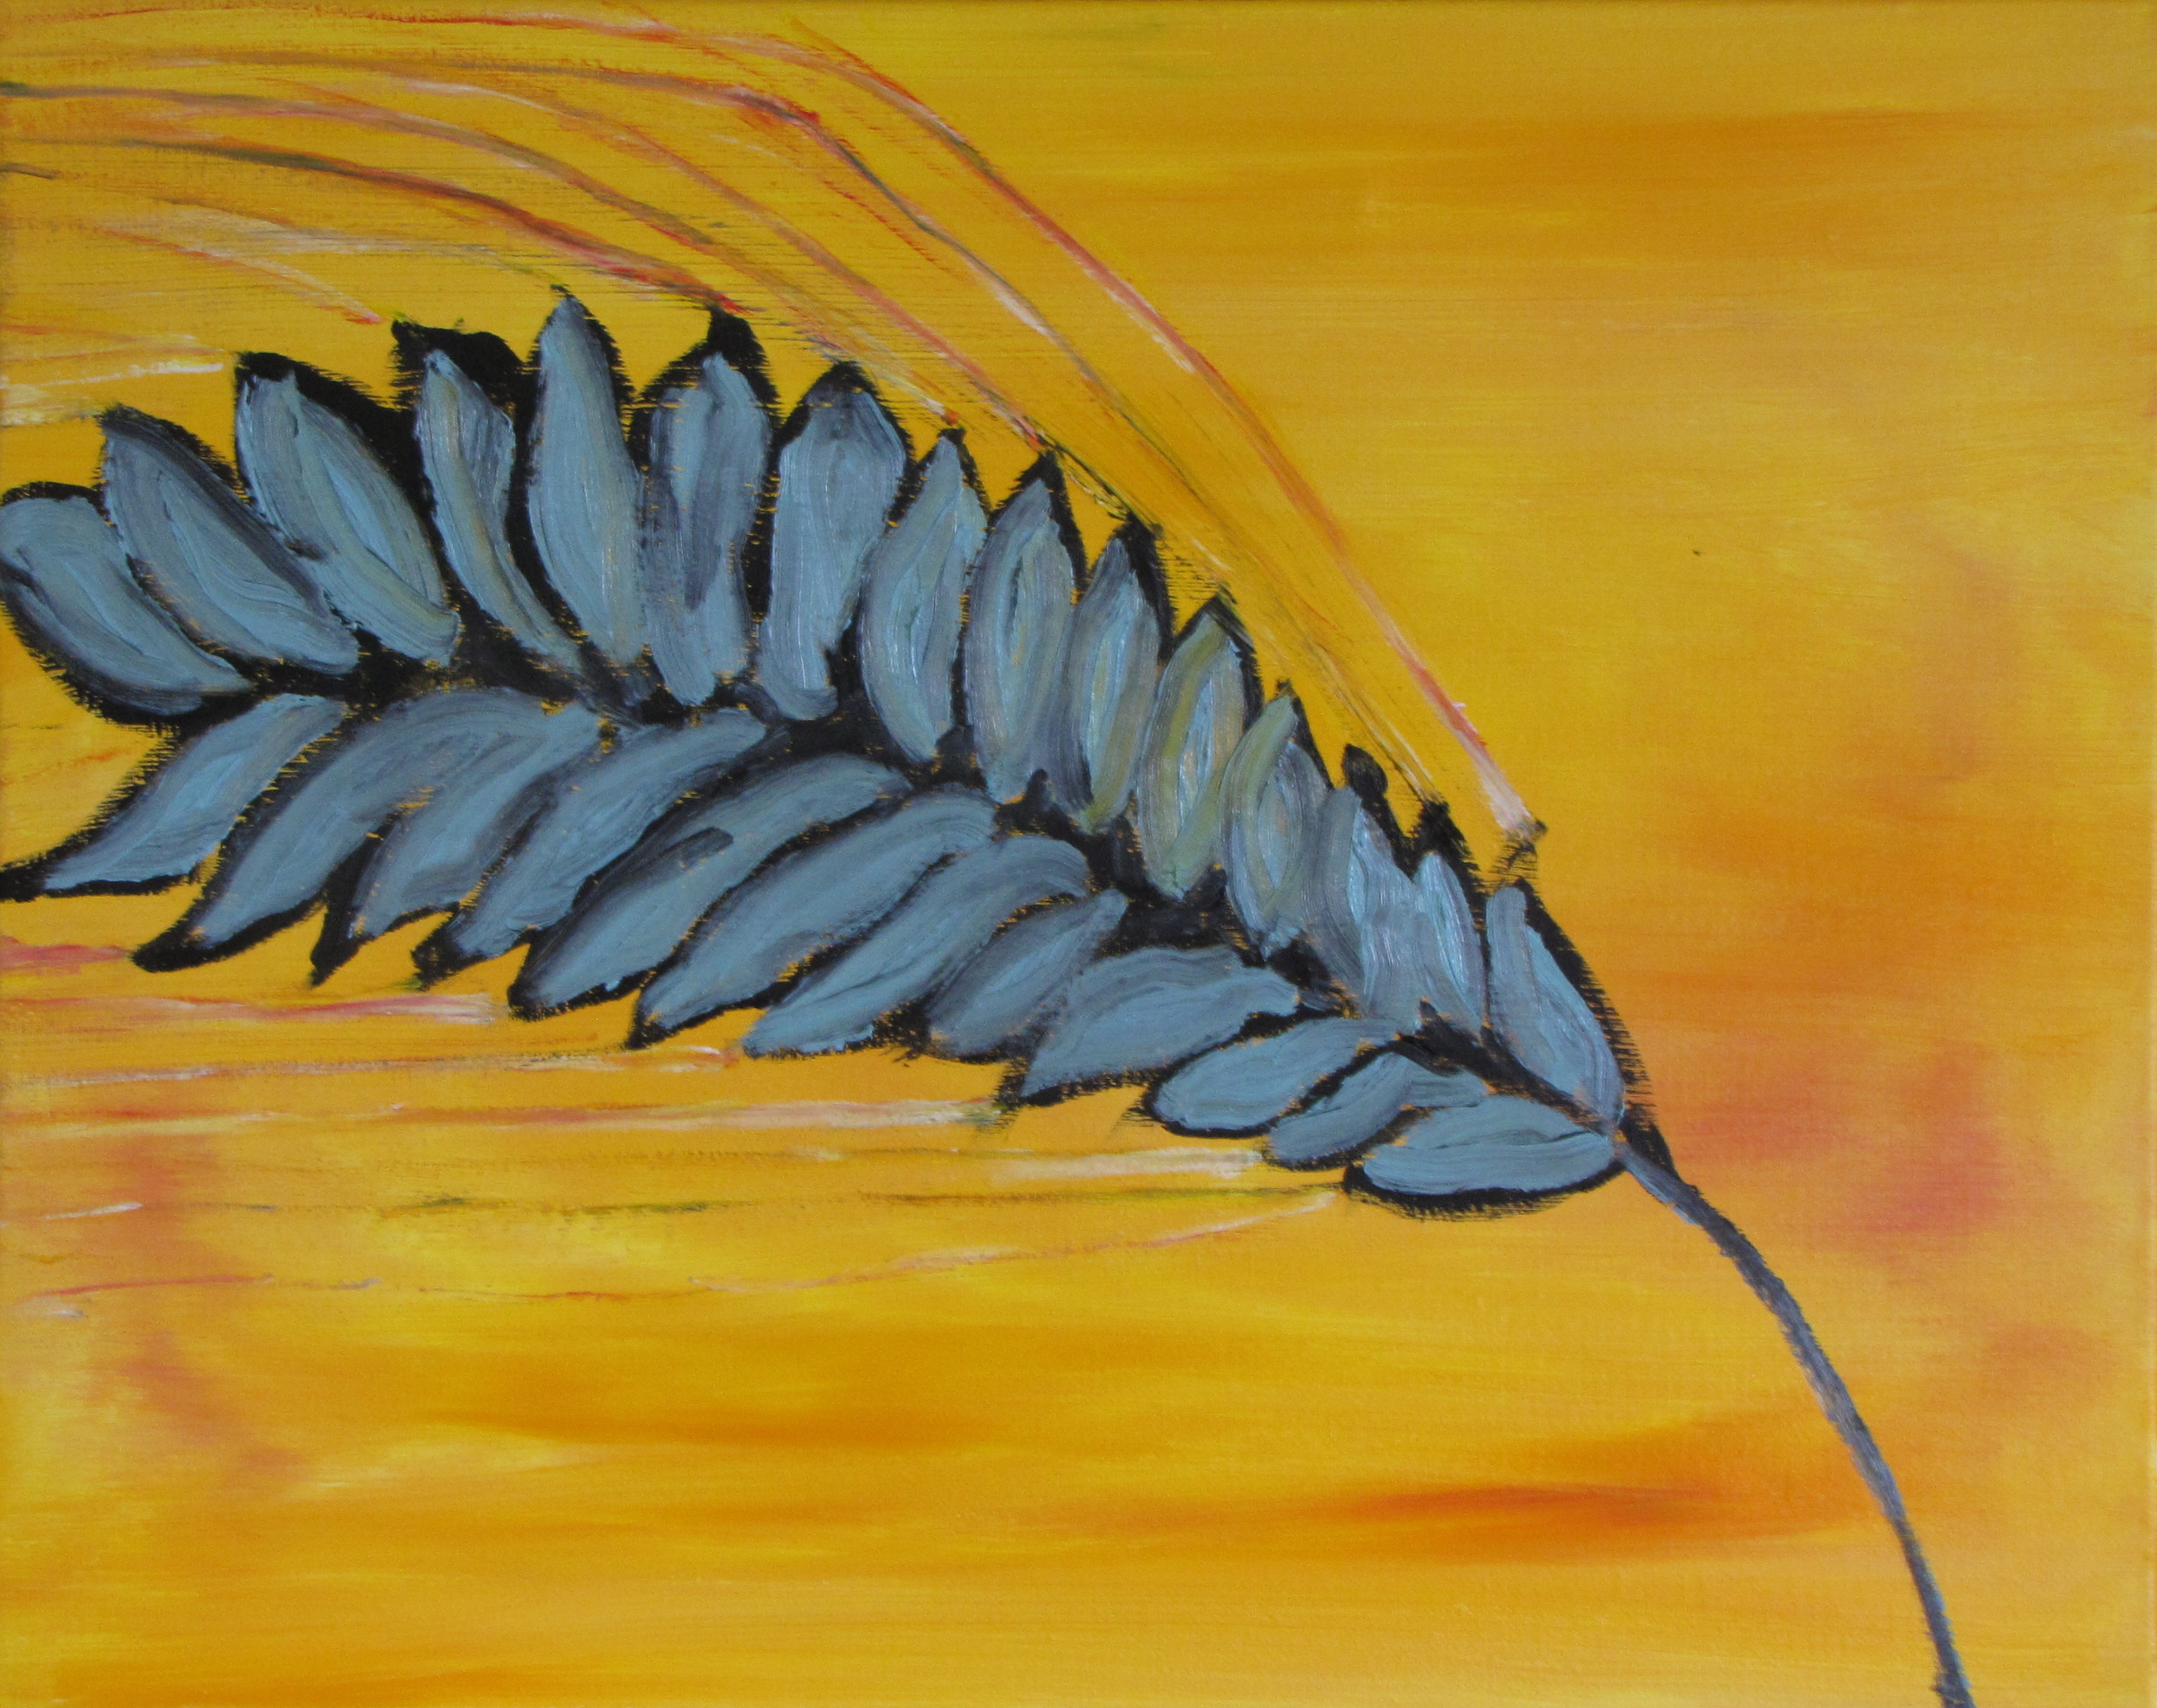 Seed Head, Sunset, Russell Steven Powell oil on canvas, 20x16